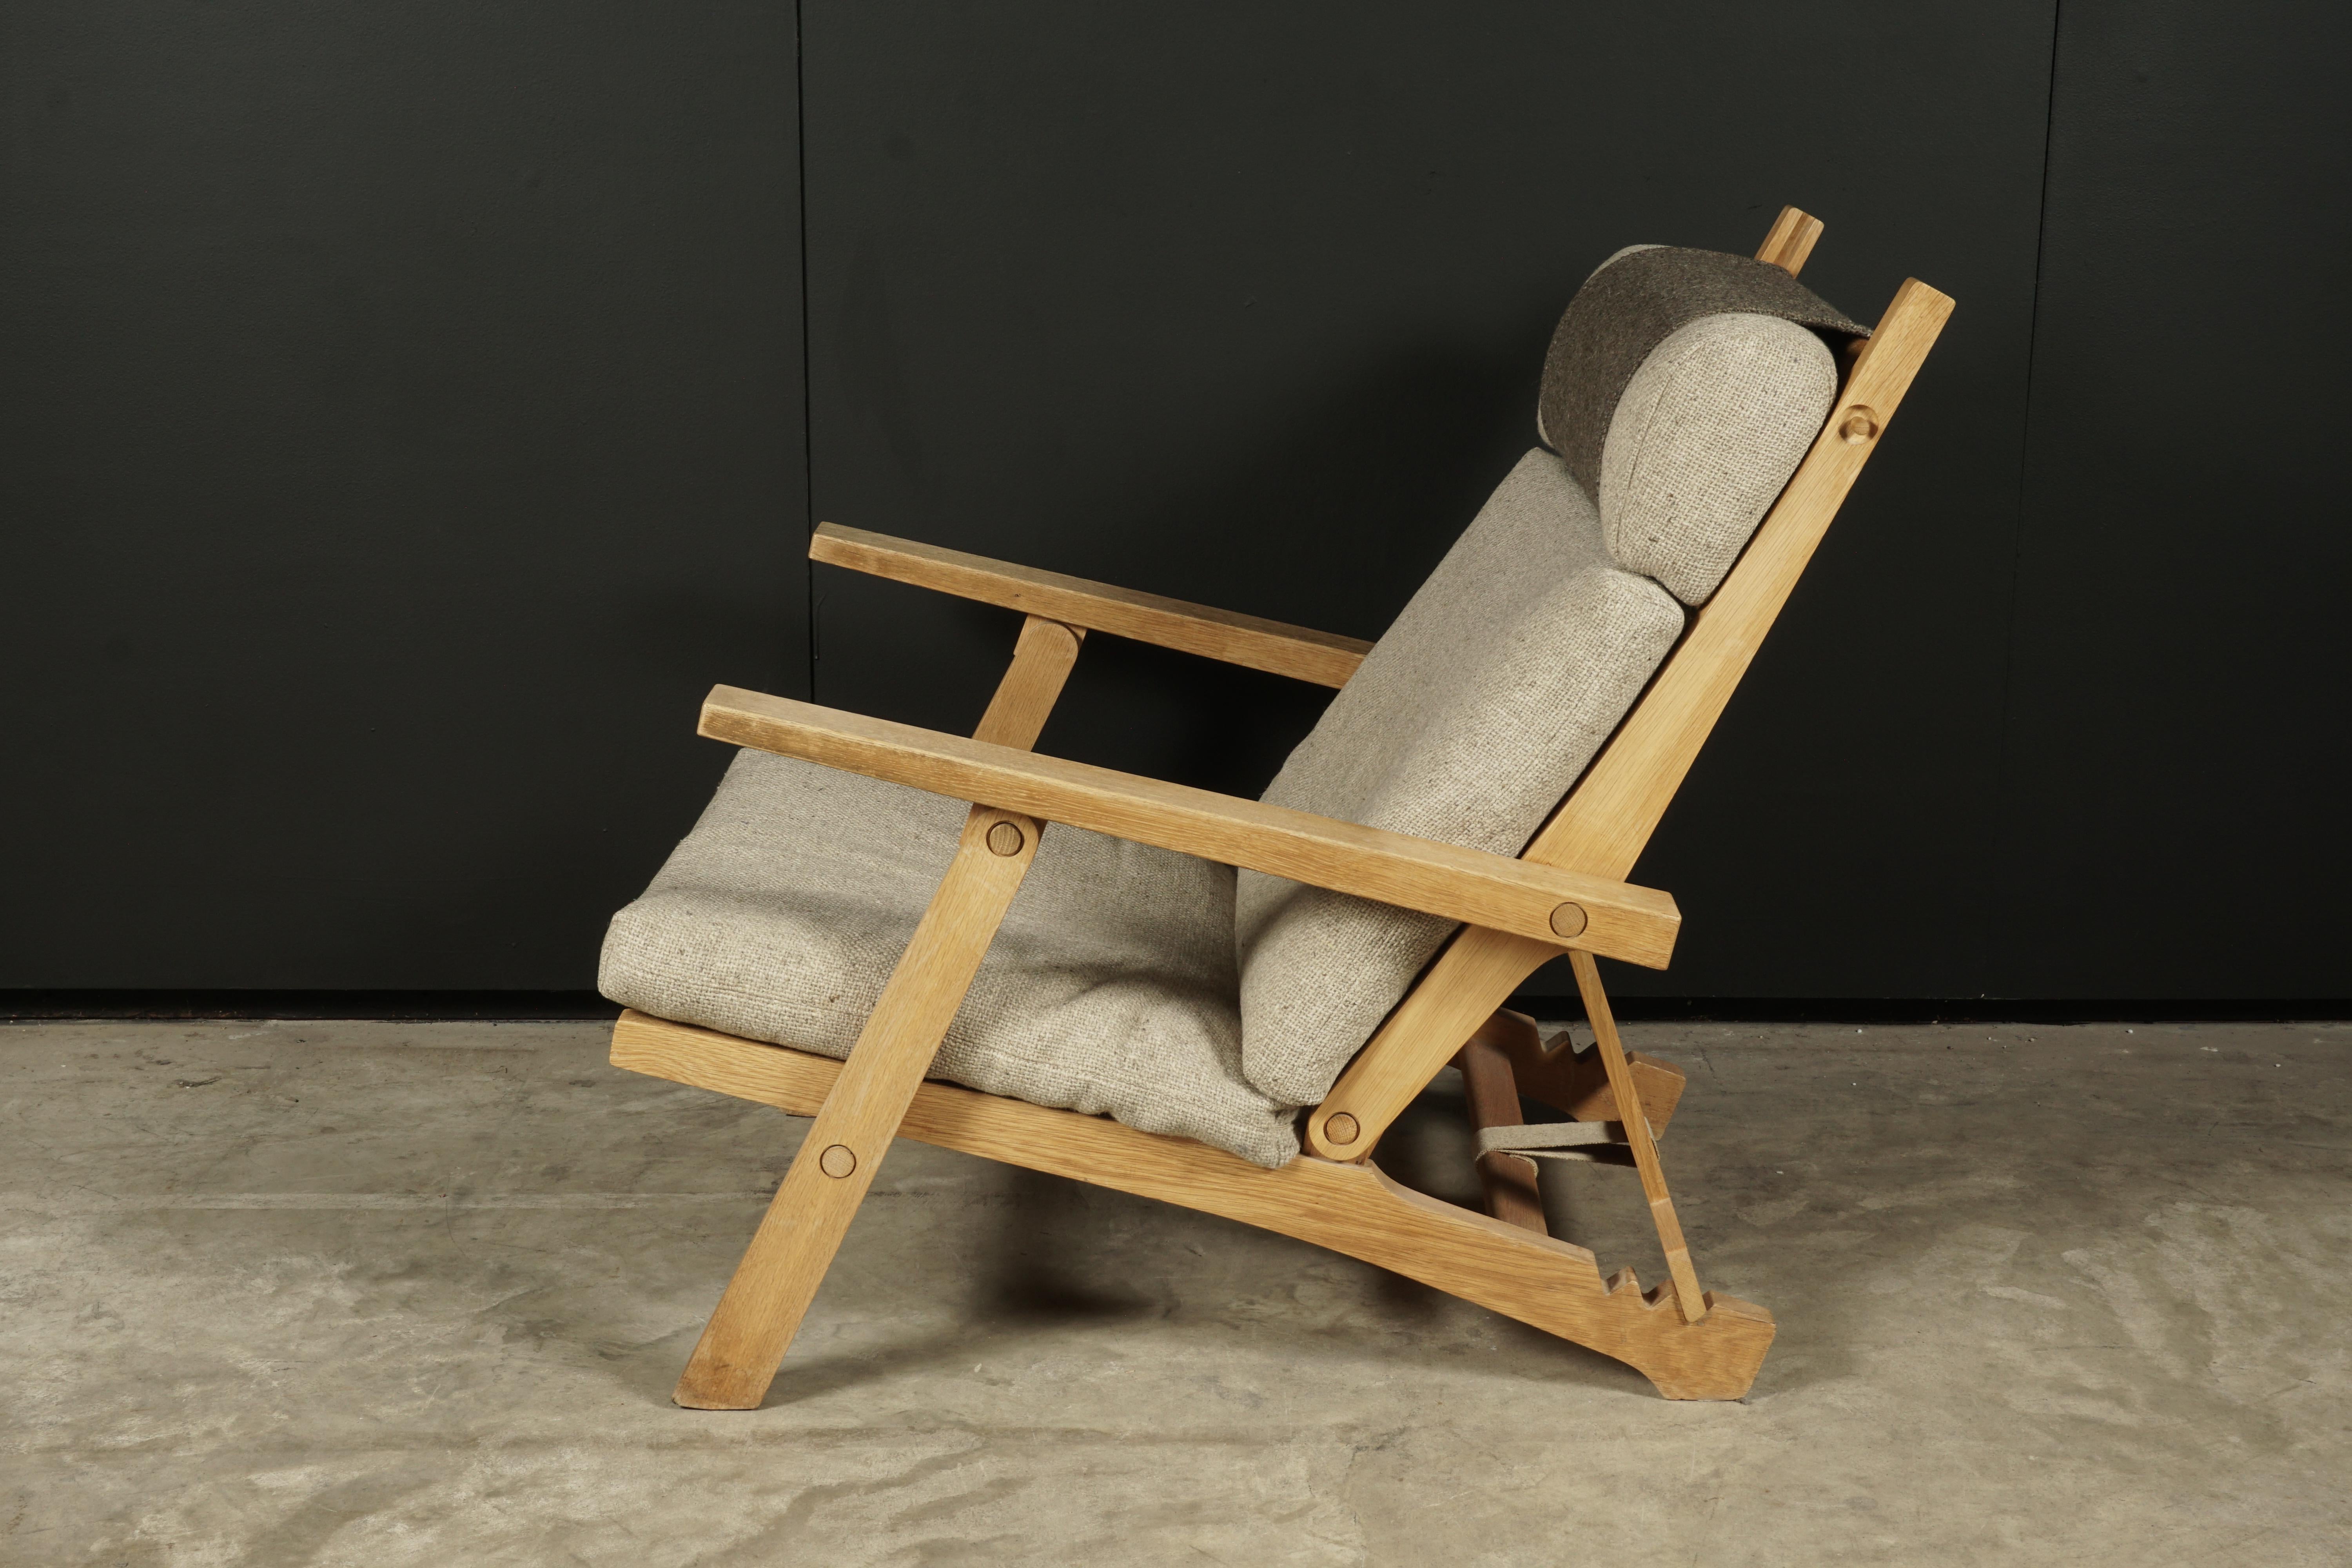 Rare lounge chair designed by Hans Wegner, model AP71, Denmark, 1968. Solid oak frame with original linen fabric. Fully foldable with adjustable back and head rest. Manufactured by AP stolen Valby.